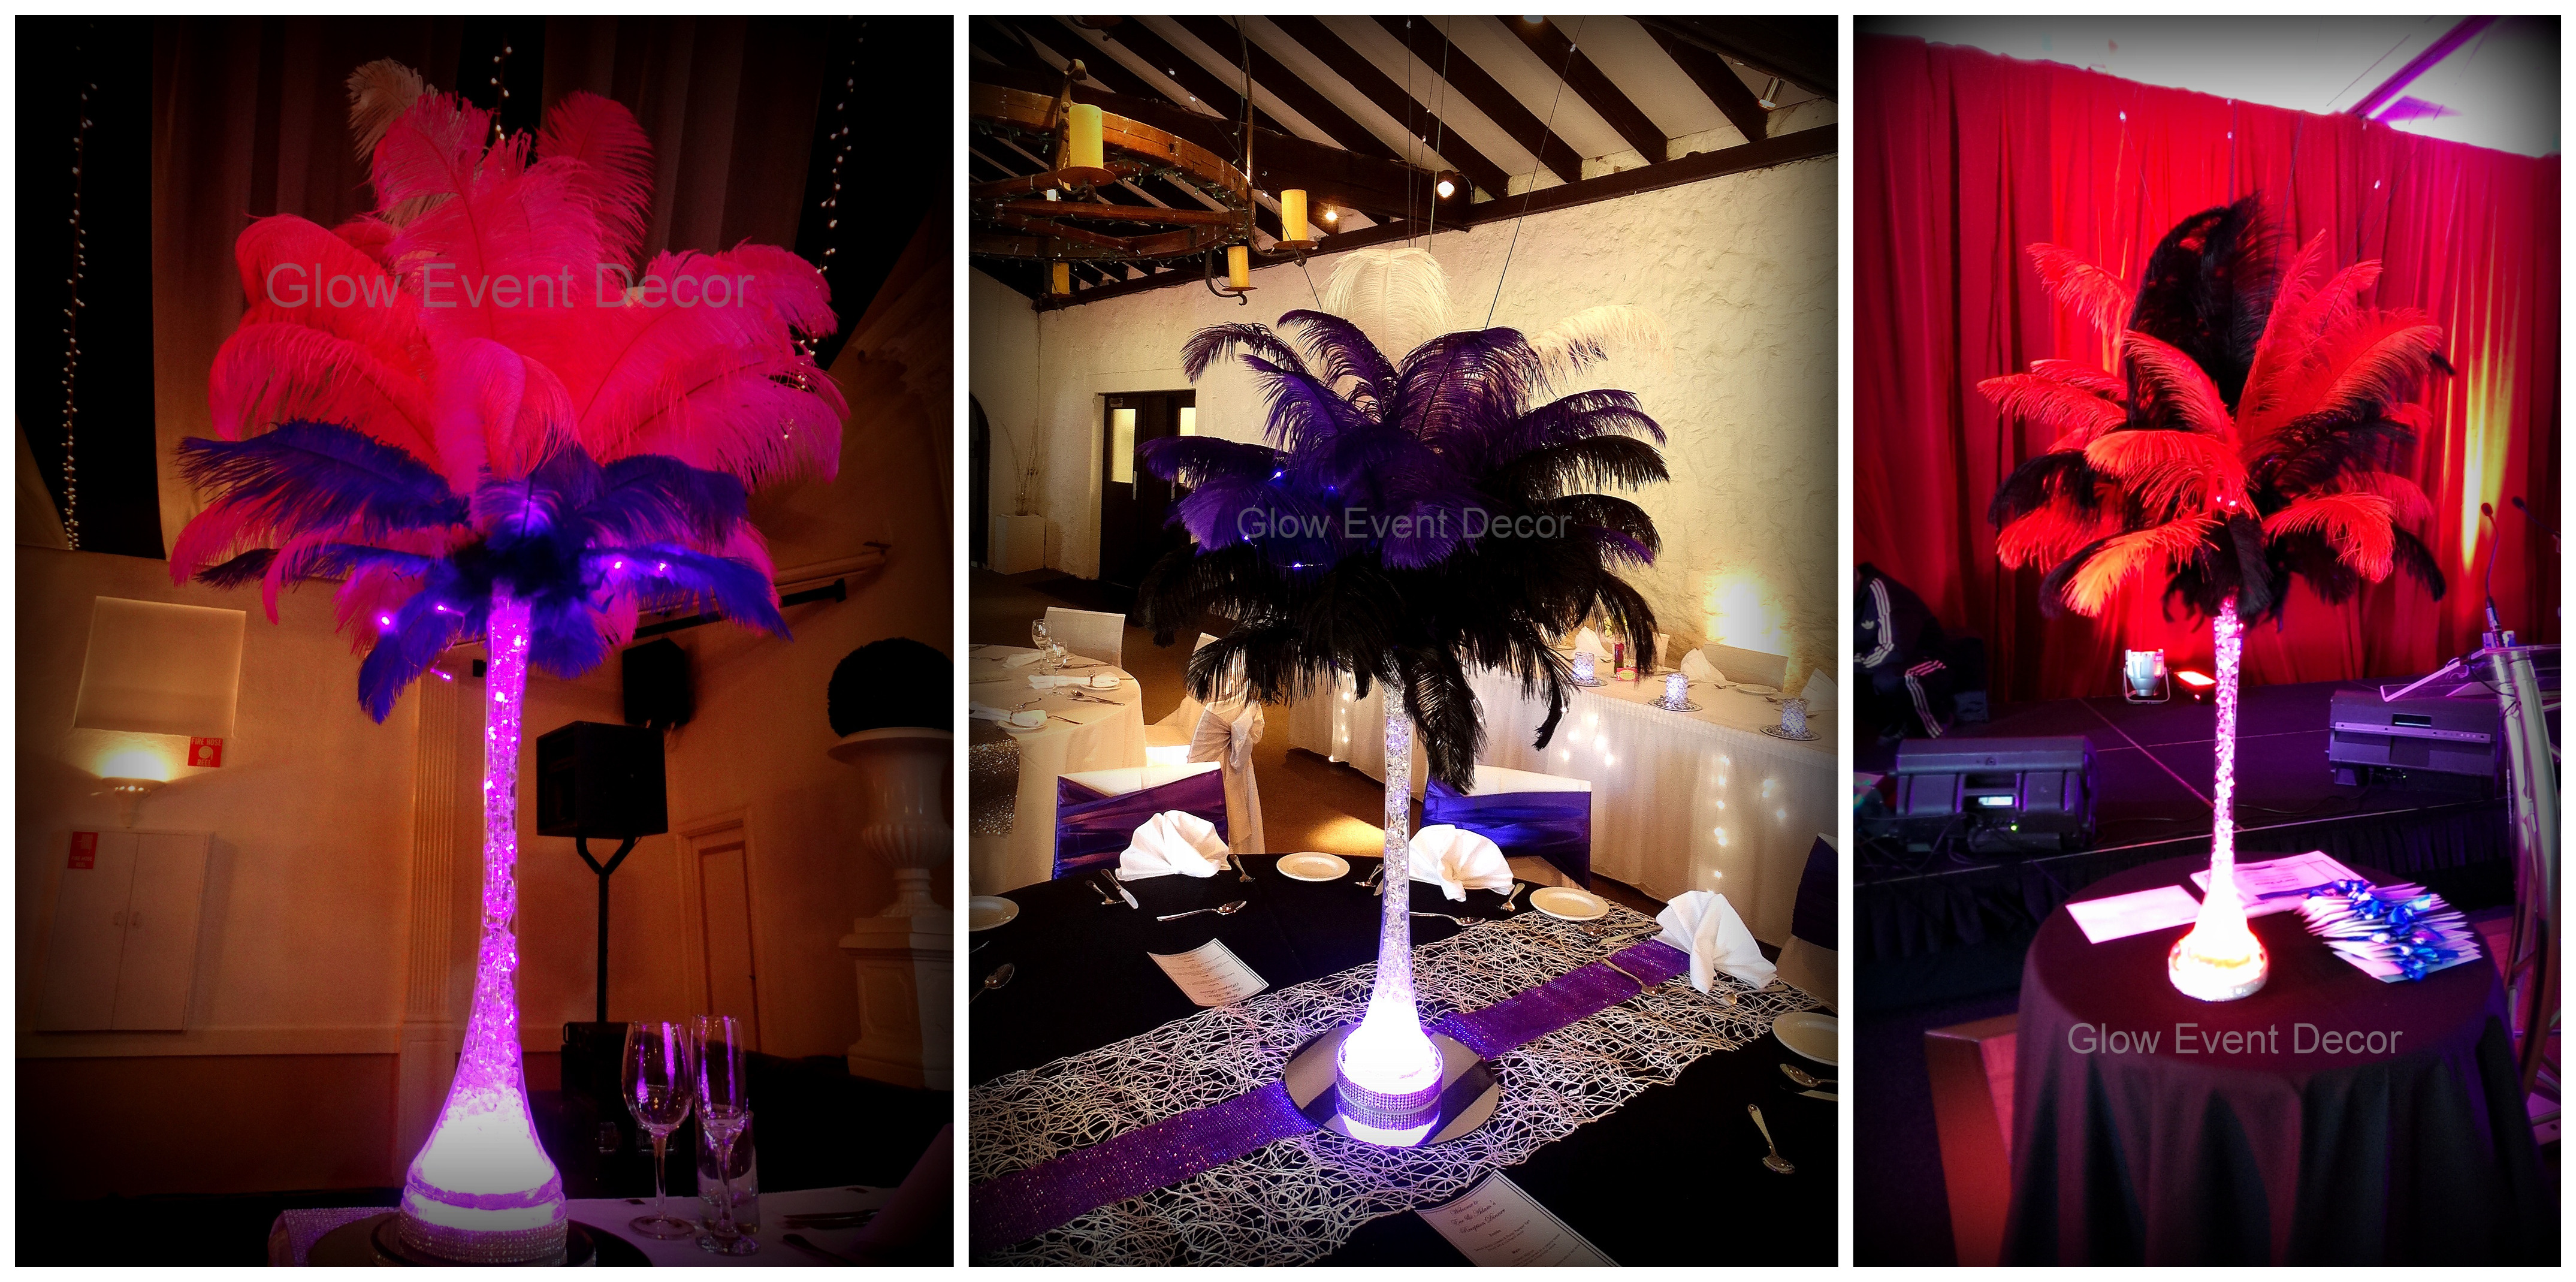 Ostrich feather table centrepiece decorations with LED eiffel tower vase, and LED lighting, available for hire from glow event decor in adelaide